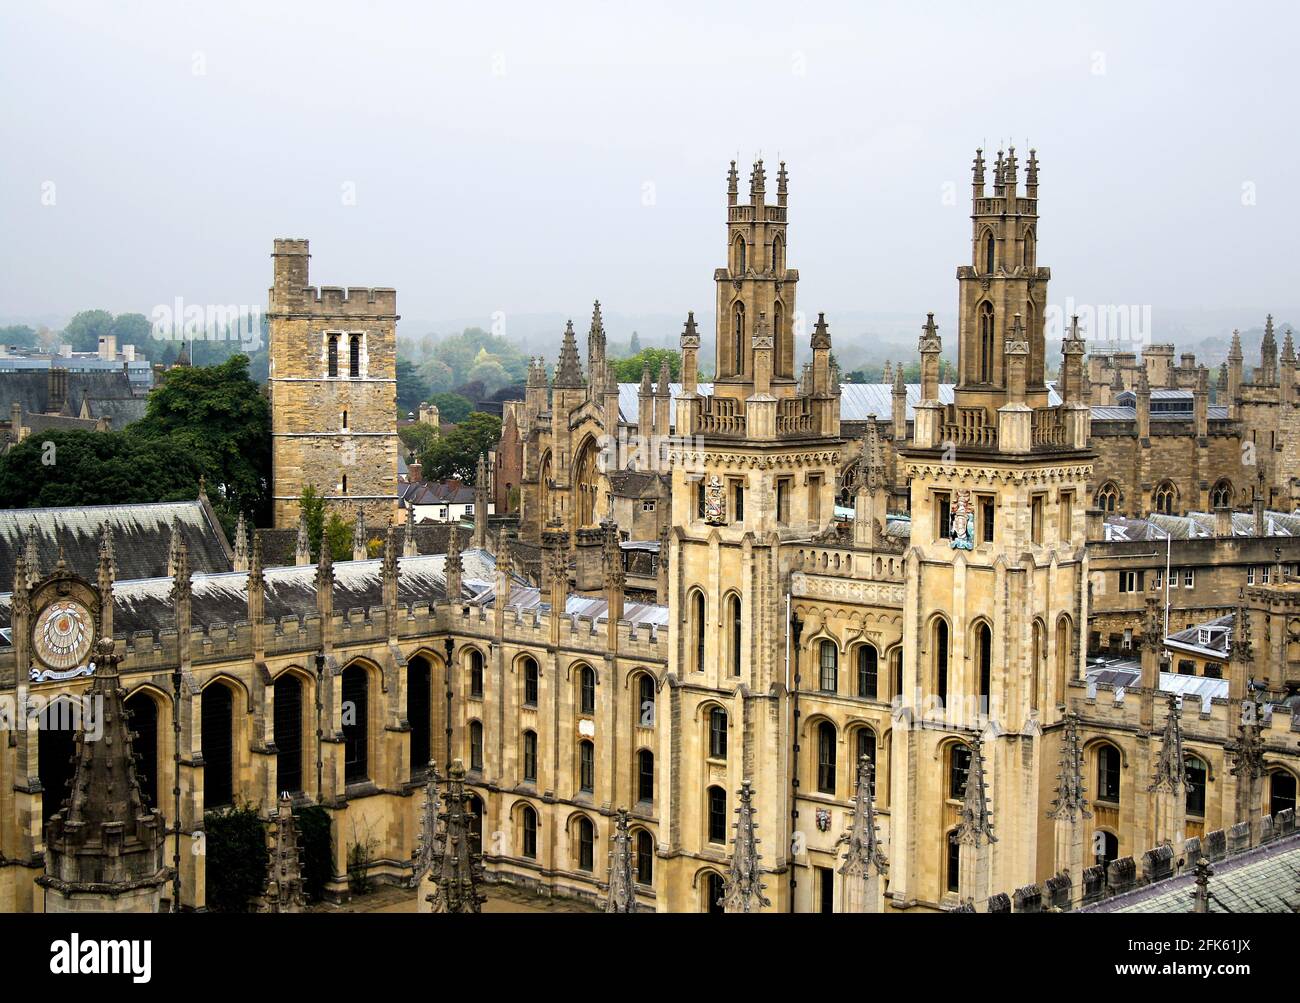 View of the All Souls College on an autumn day, in typically English, overcast weather. The College is part of the prestigious University of Oxford. Stock Photo